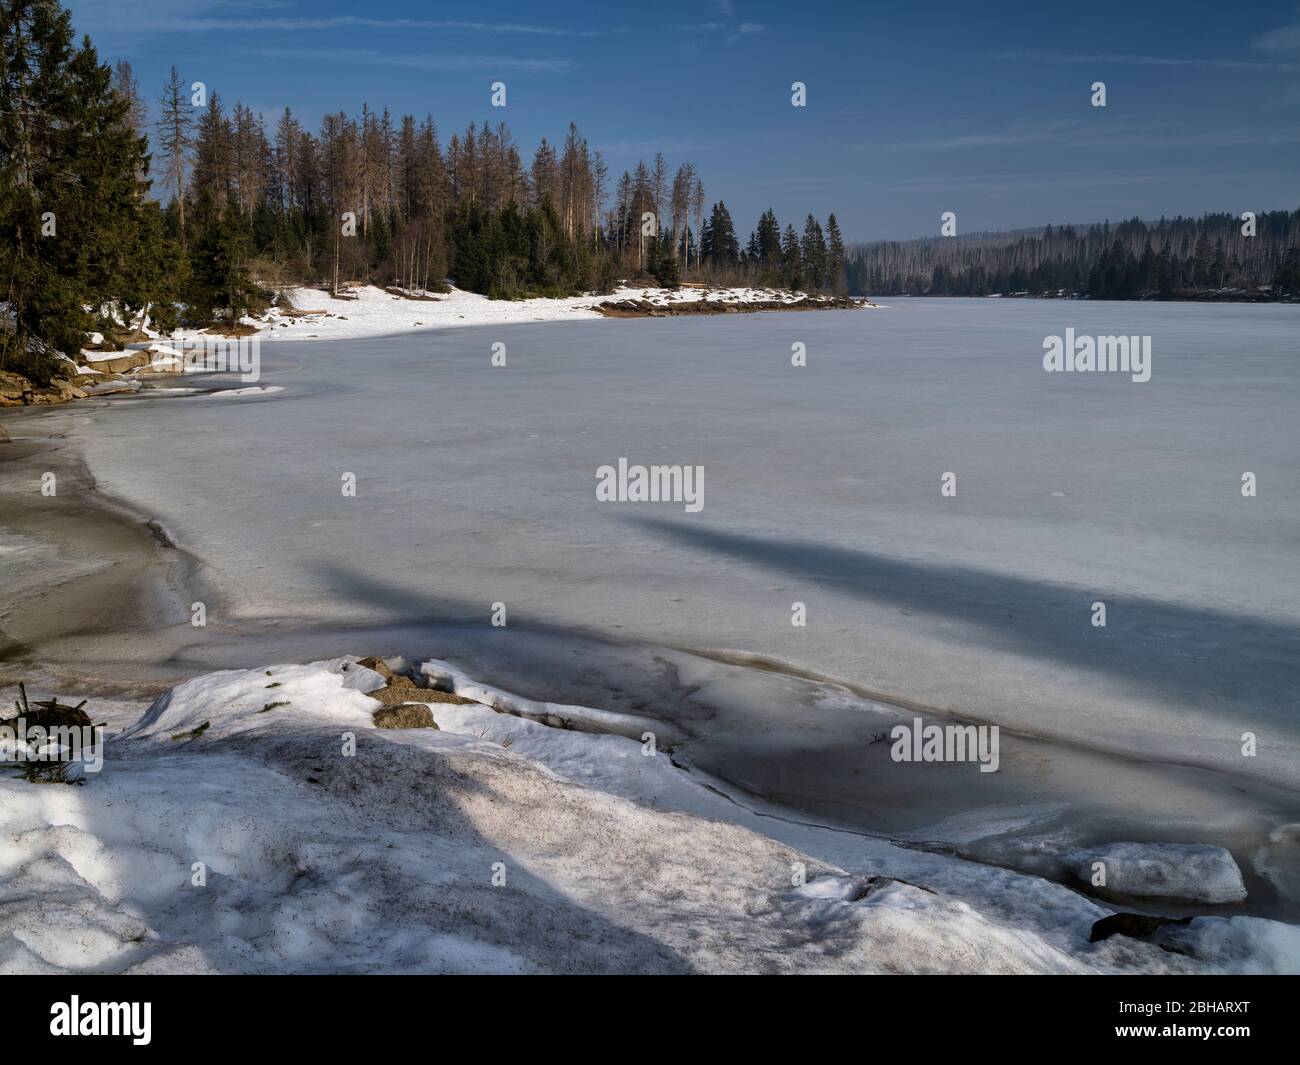 Europe, Germany, Lower Saxony, peat house, Harz National Park, spruce at Oderteich, winter mood Stock Photo